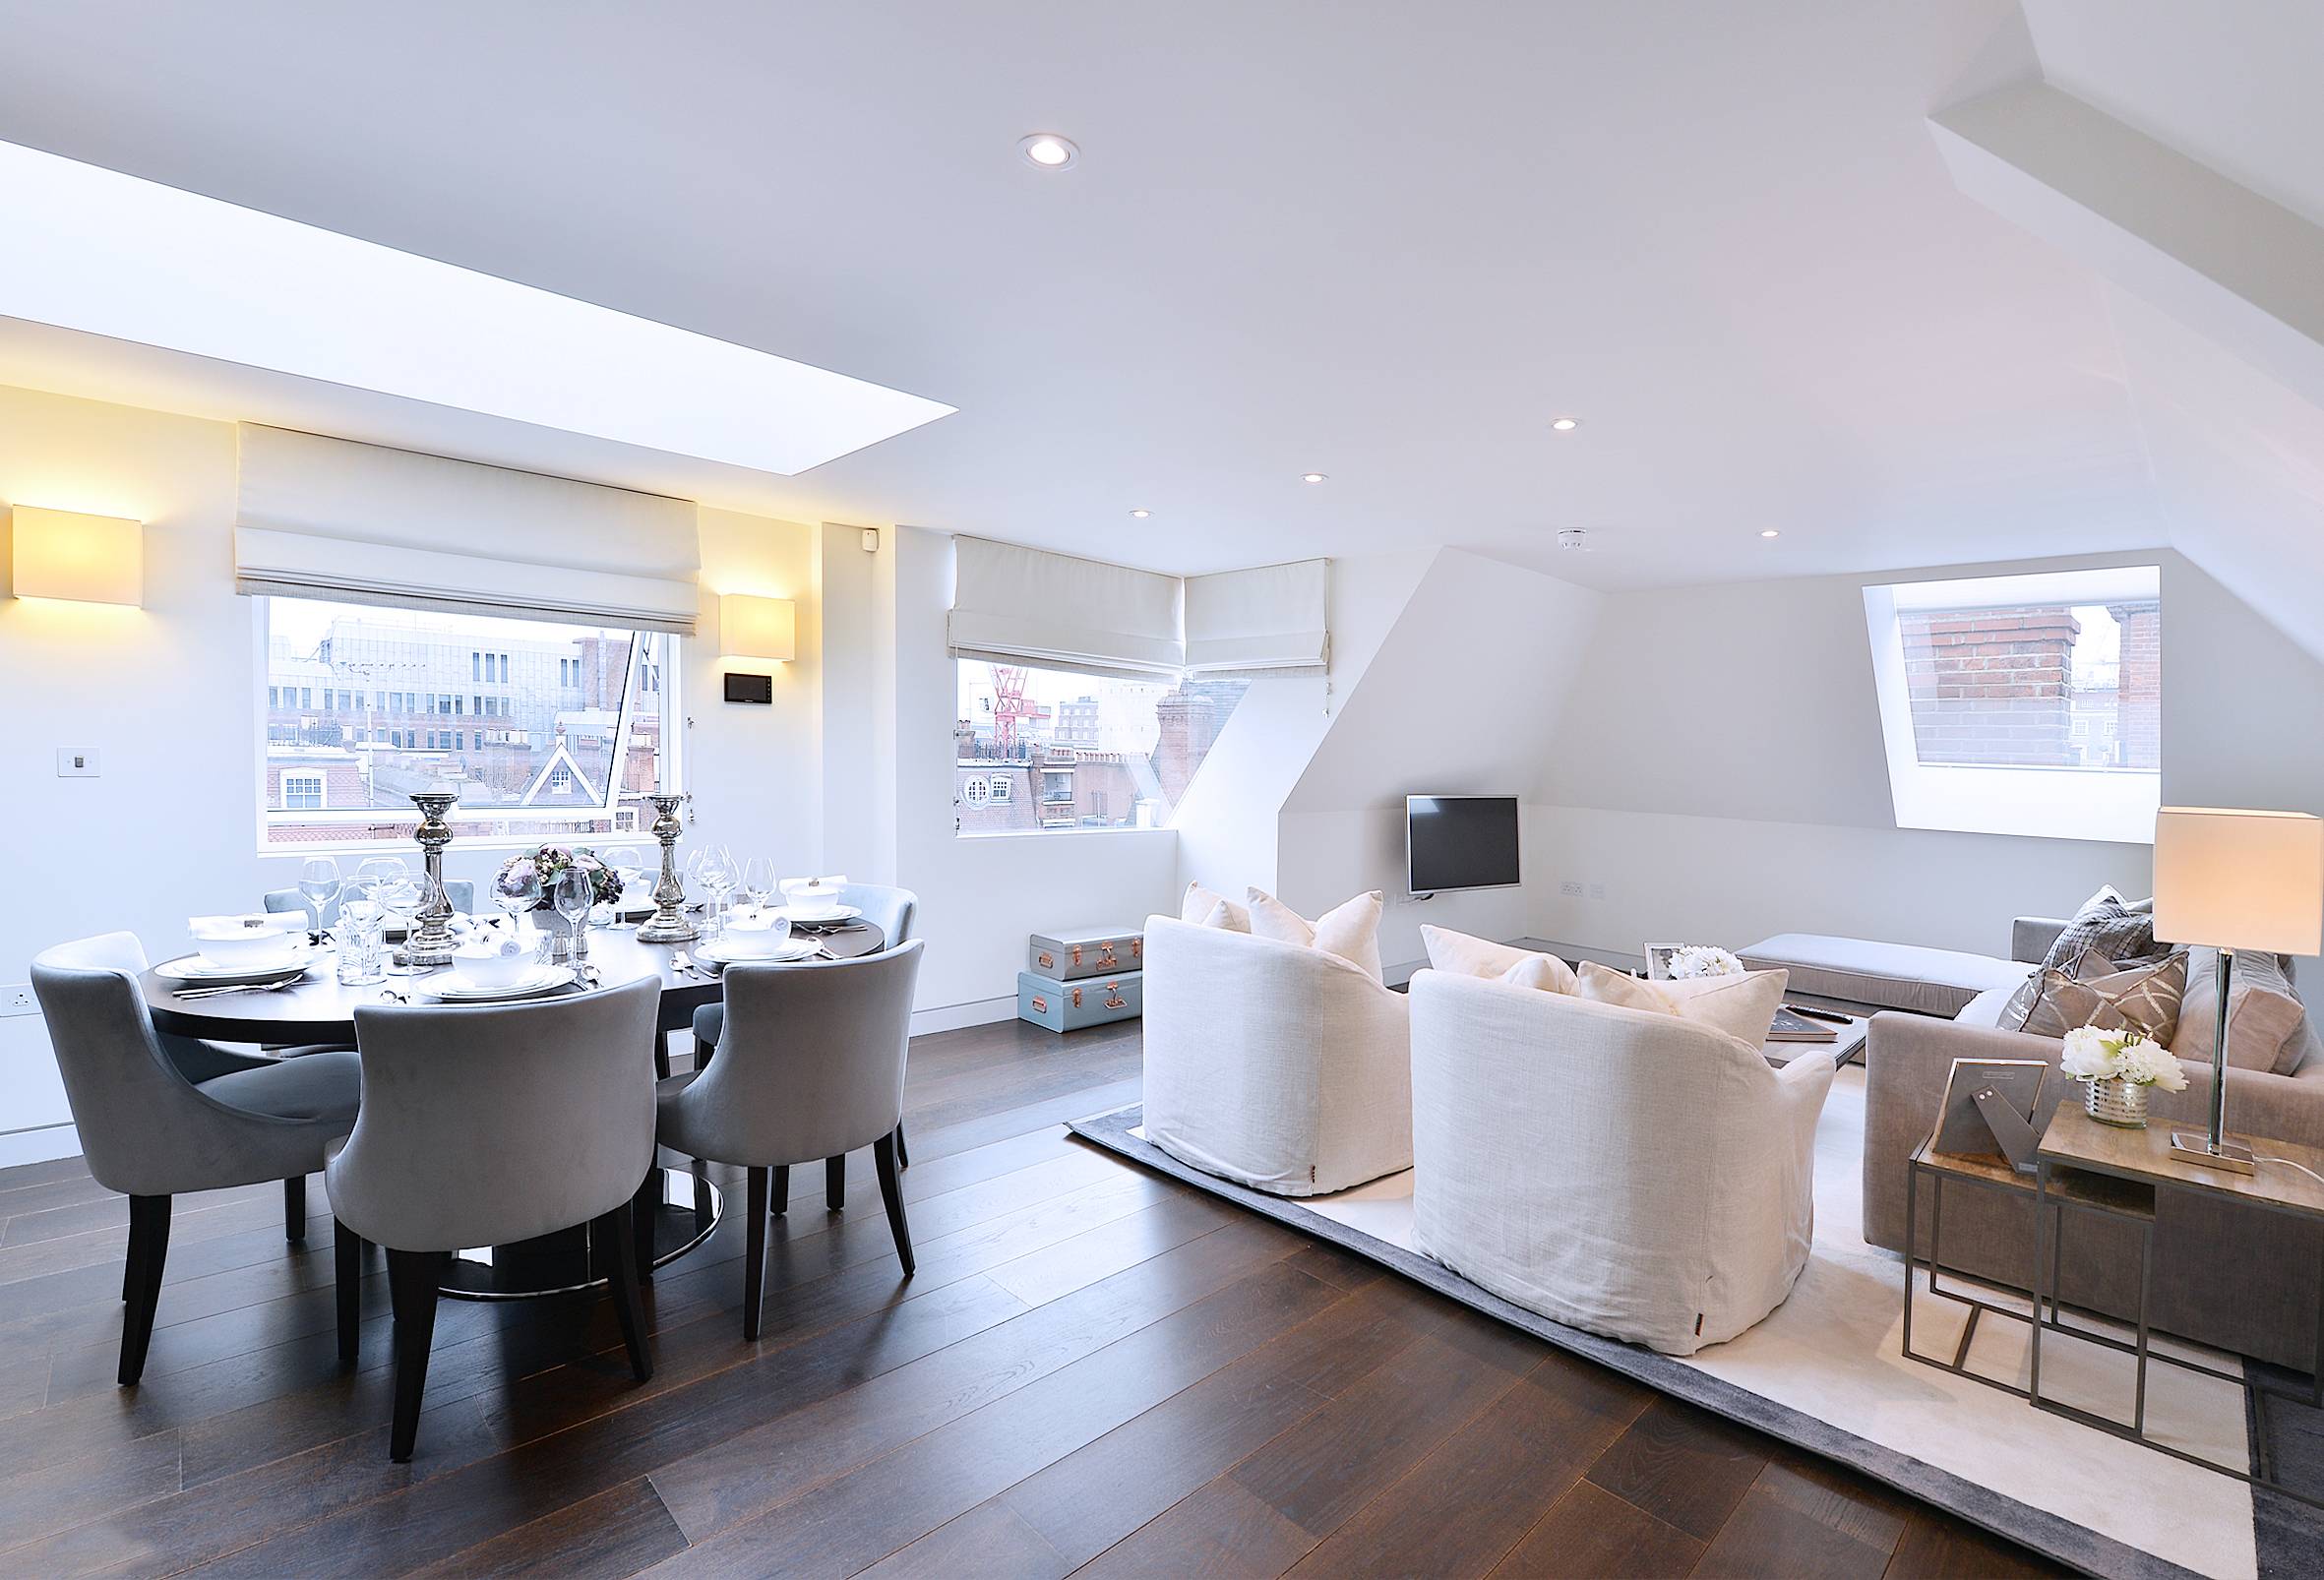 Stunning interior-designed two-bedroom duplex apartment, located in the heart of Mayfair.